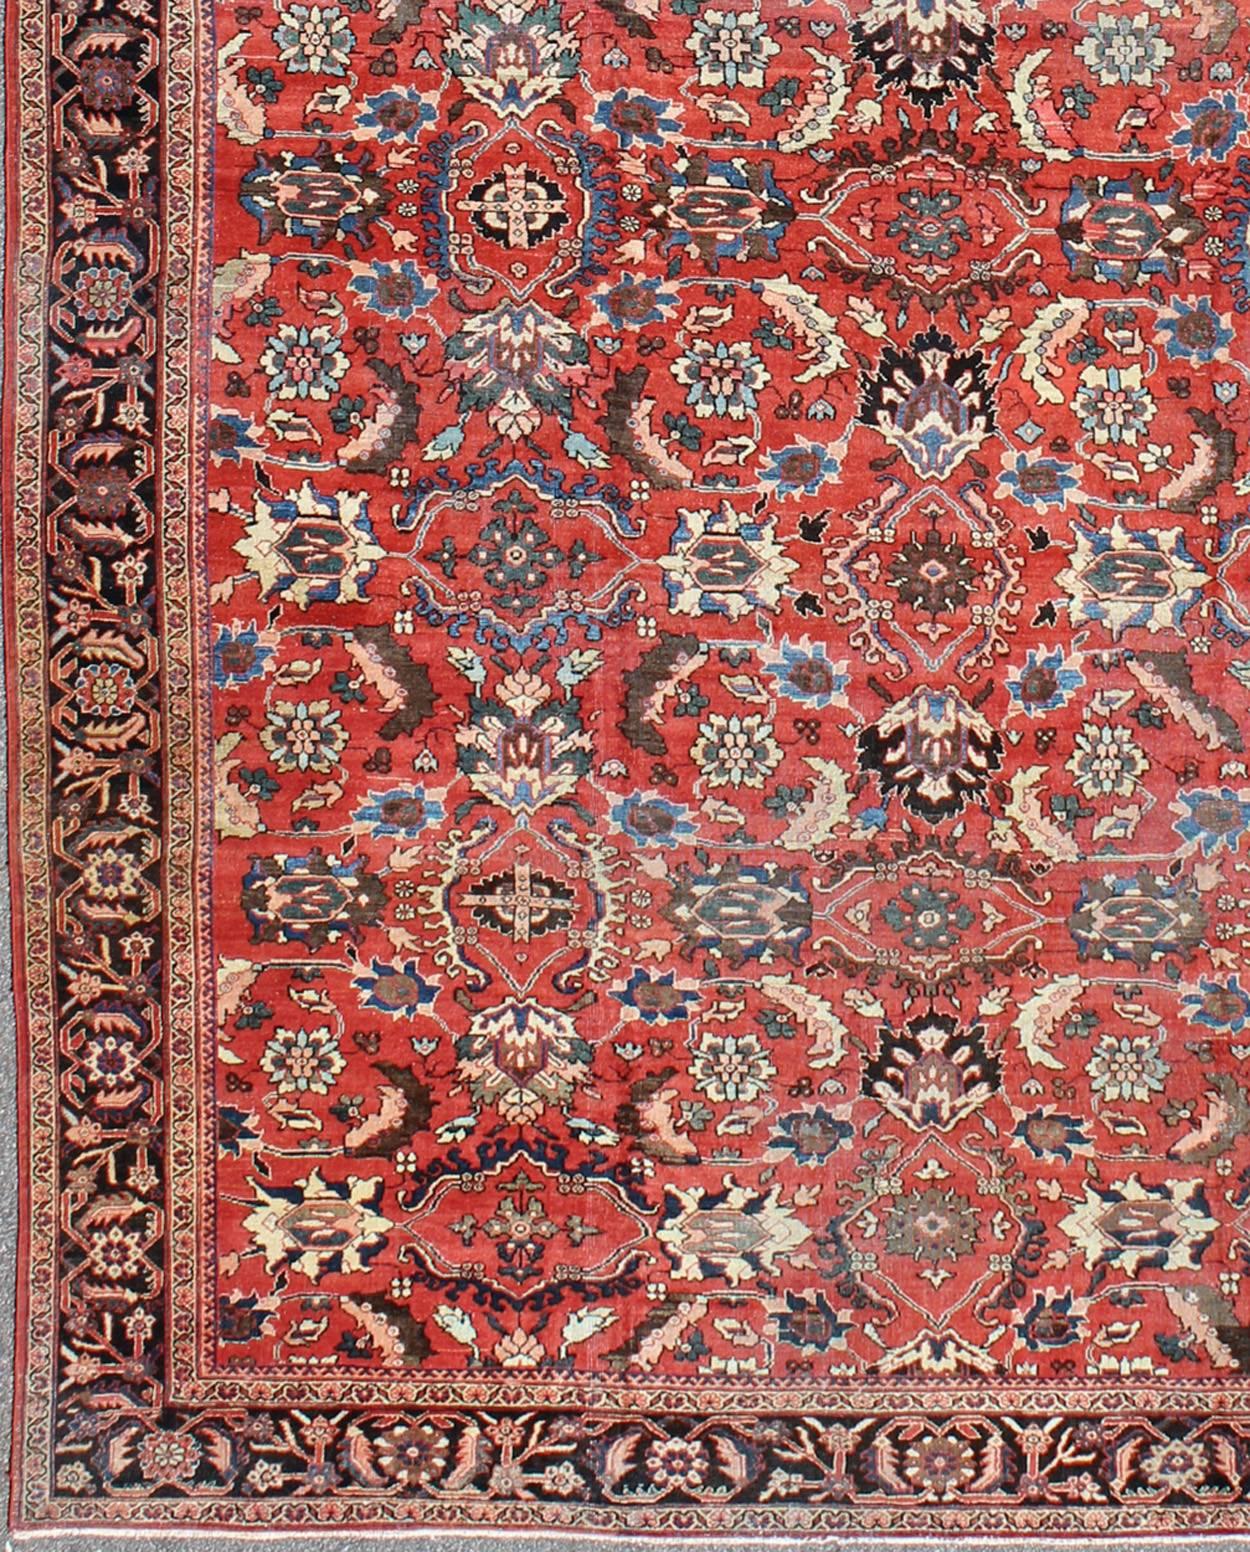 Very Large Persian Sultanabad Mahal Rug in Red, Brown, Green, Cream & Blue.
This Sultanabad relies heavily on exquisite details as well as large-scale palmettes. A fine trellis of richly colored large and small flowers sprawls across the soft red